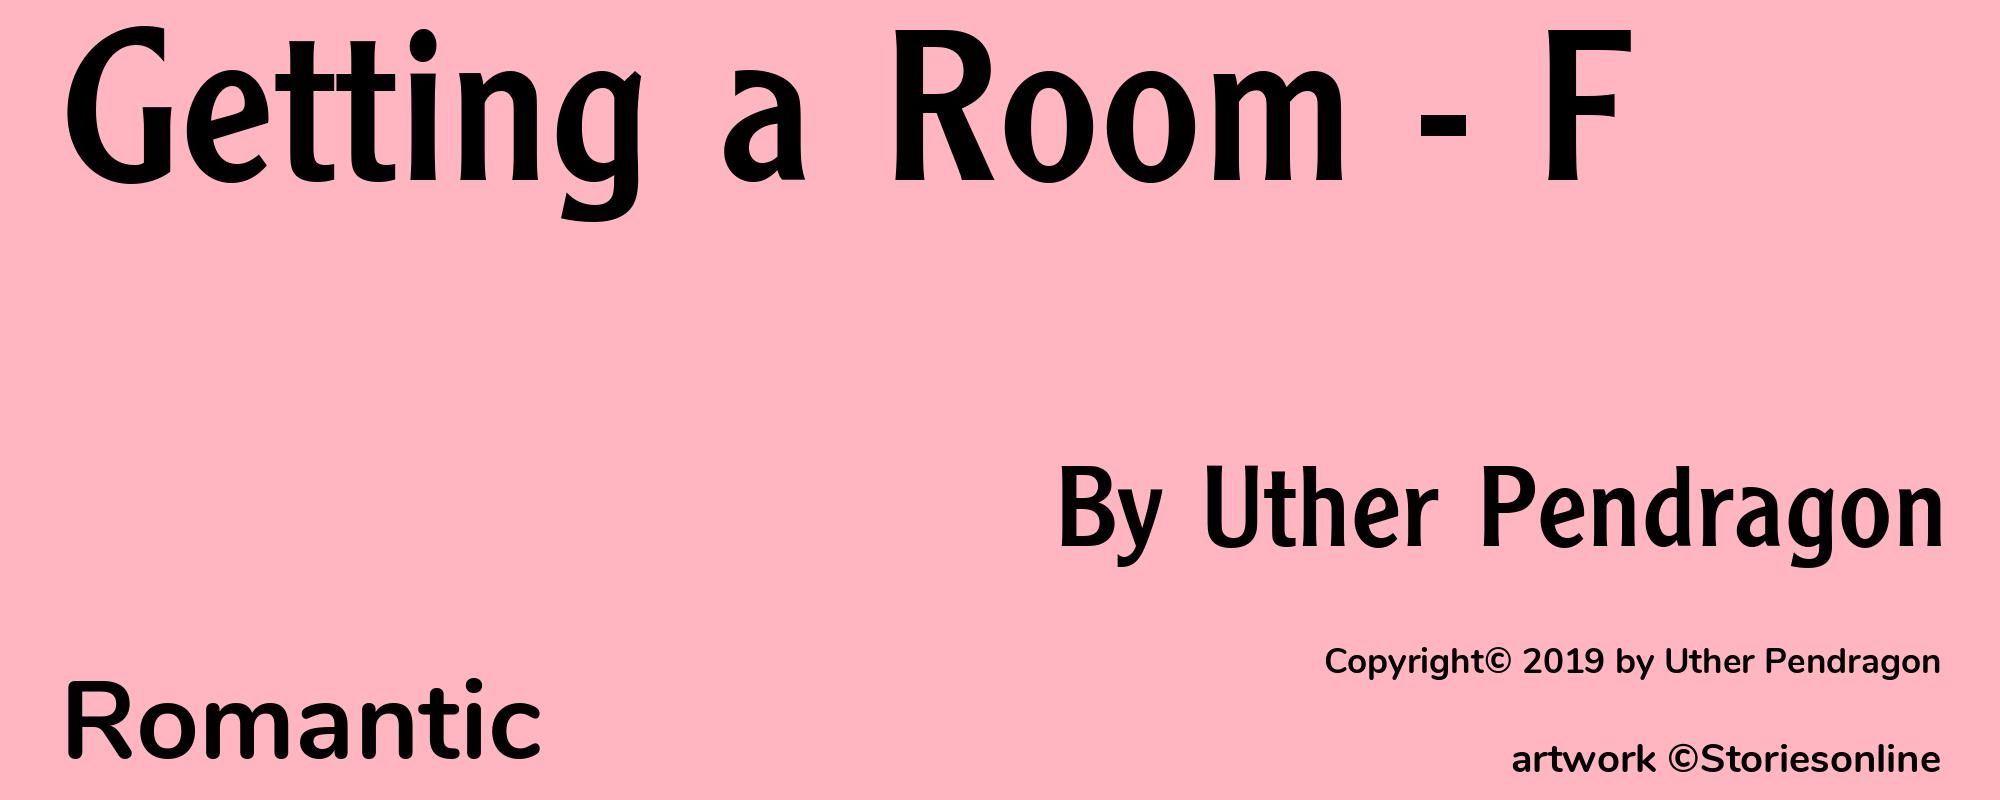 Getting a Room - F - Cover